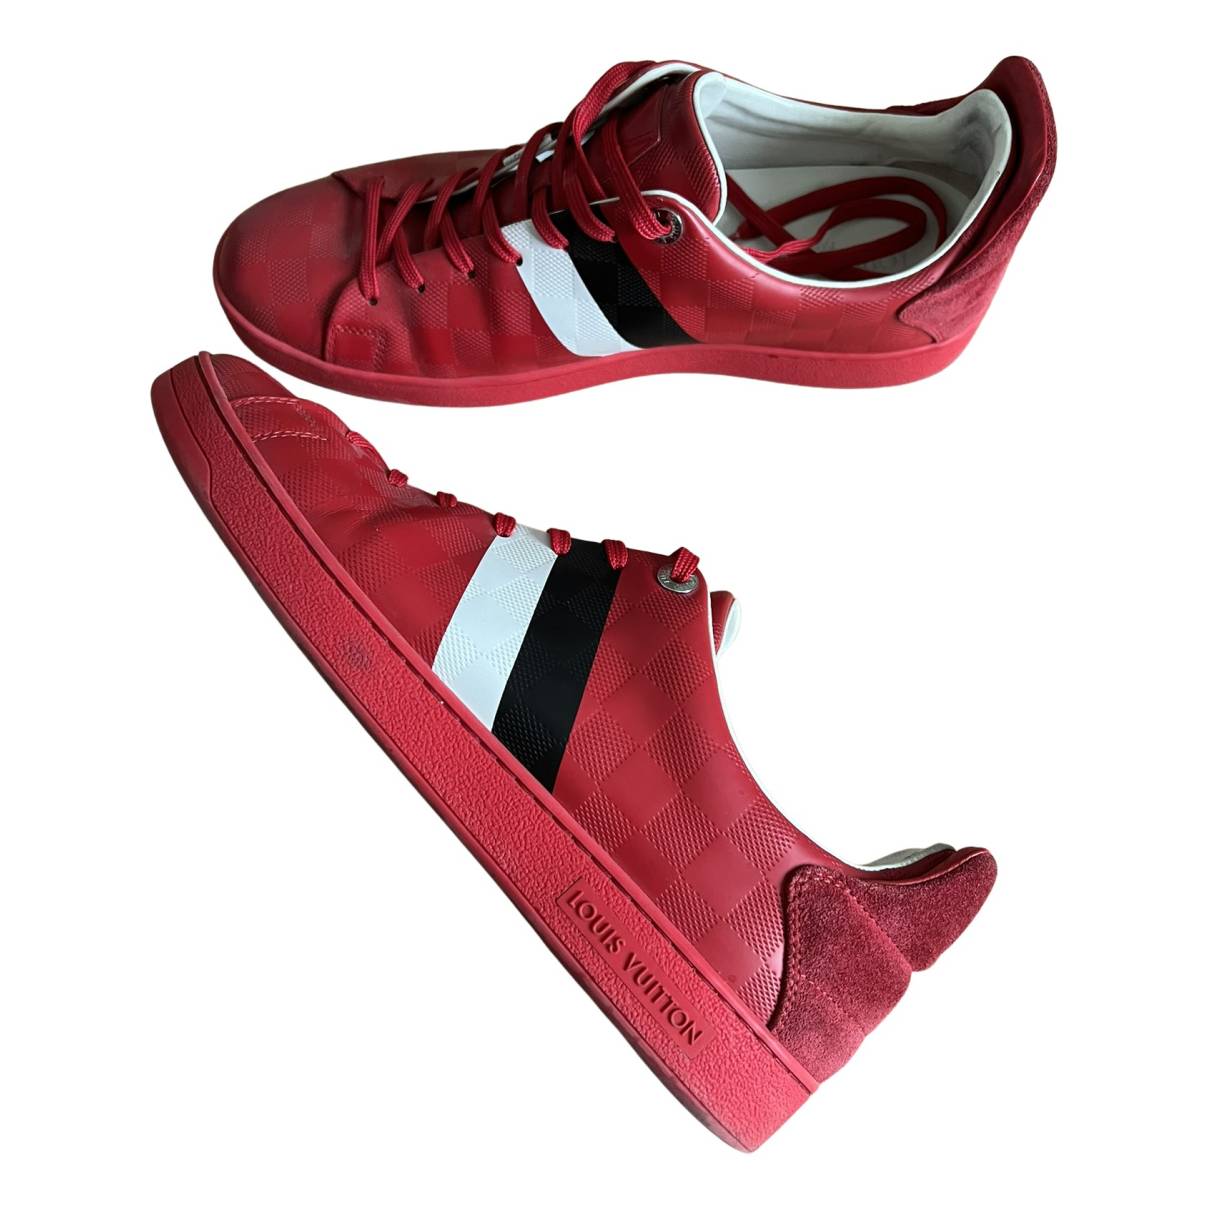 Lv trainer leather high trainers Louis Vuitton Red size 8 UK in